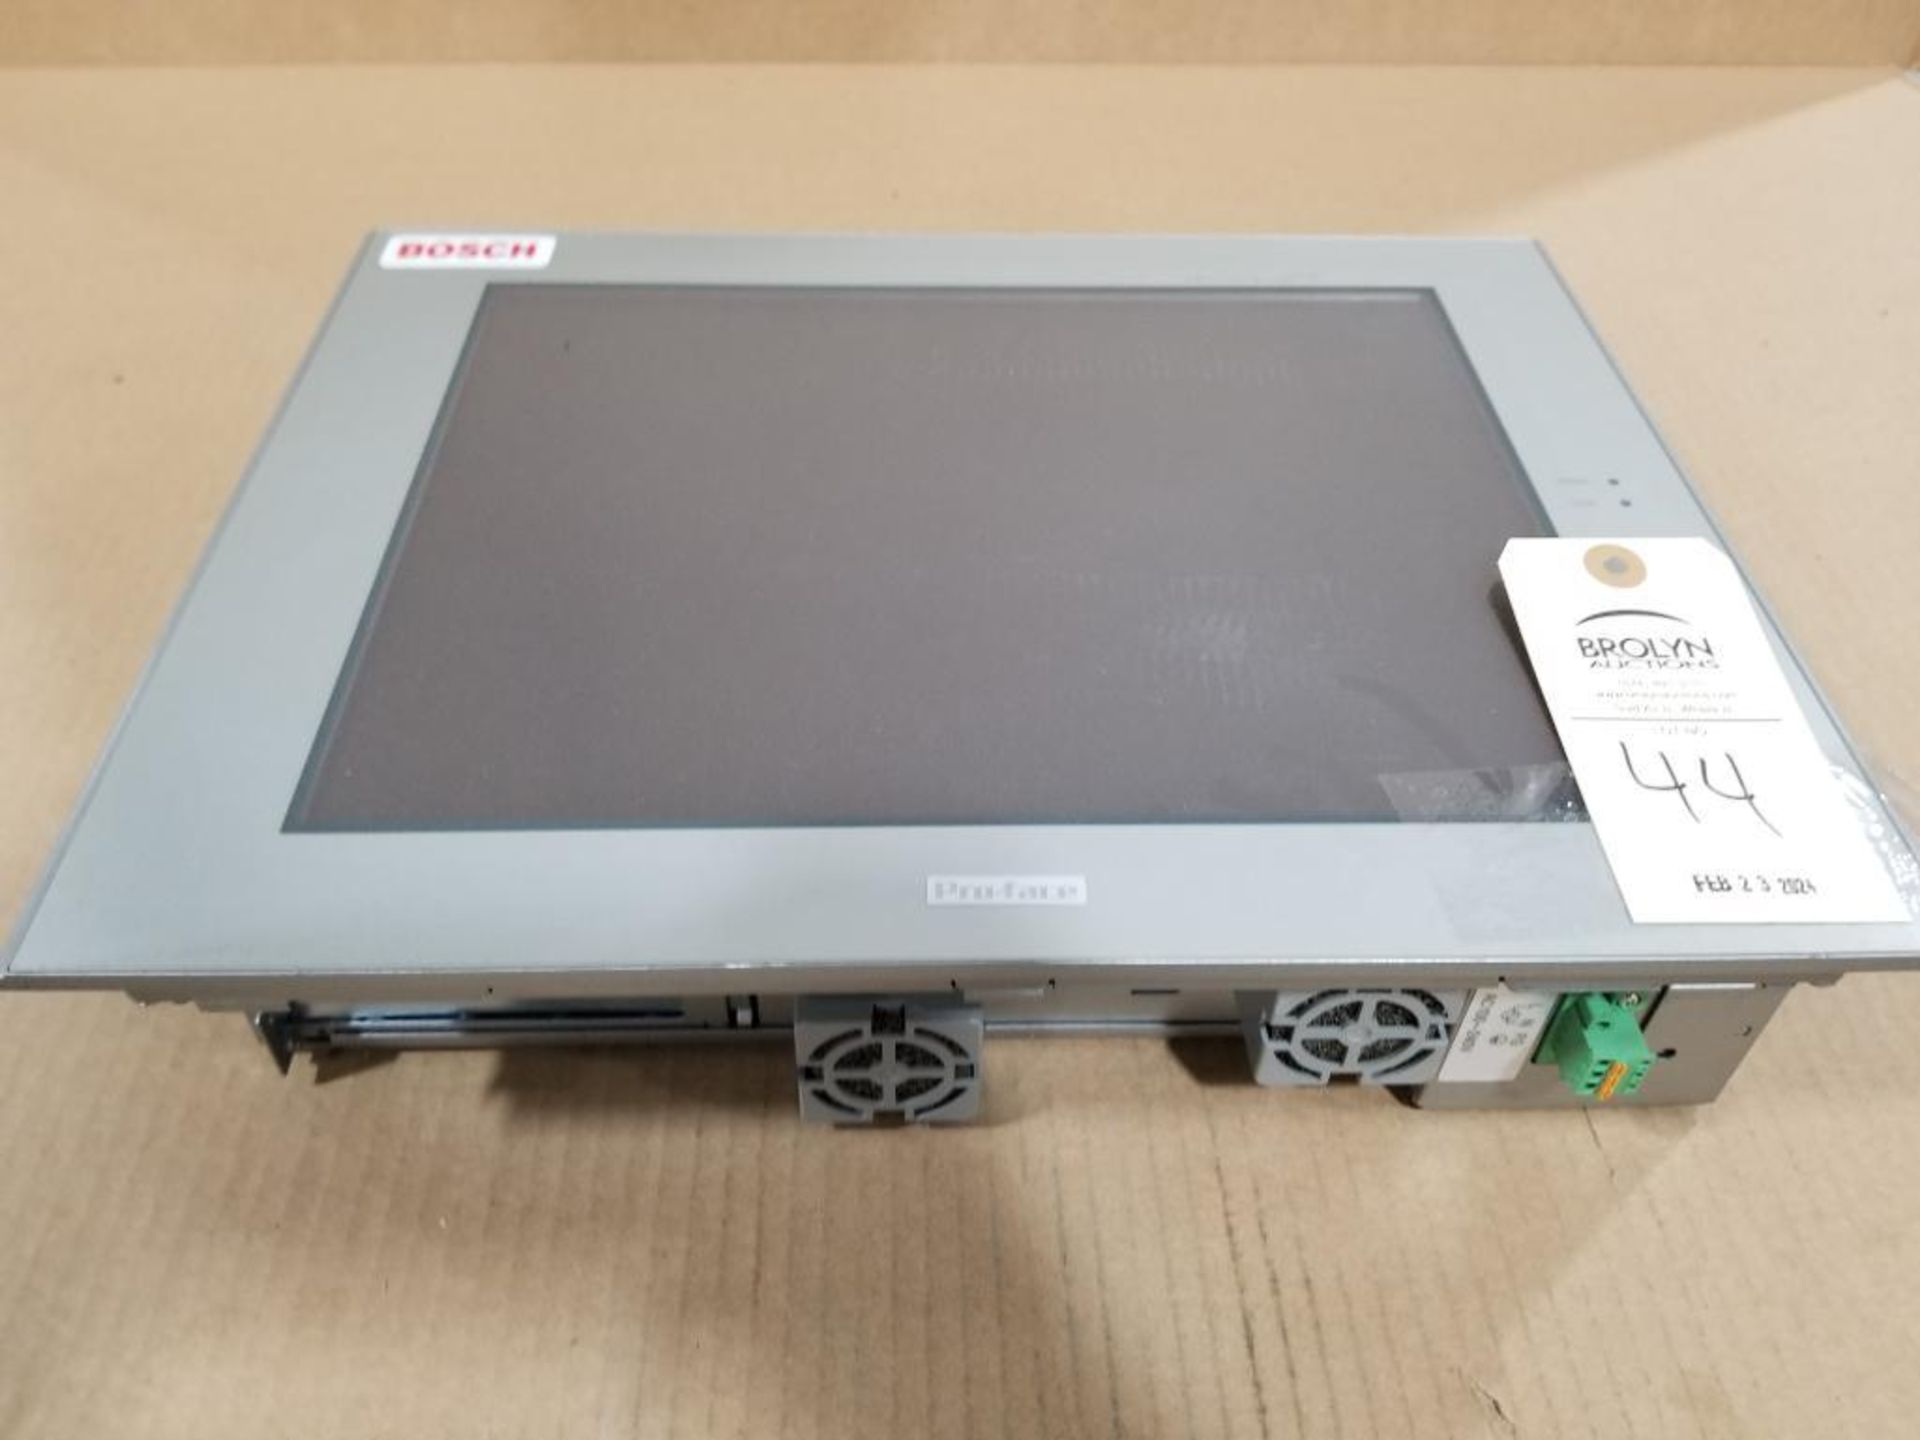 ProFace human machine interface. Model number 3580301-02. Part number PS3710A-T41-PA1.